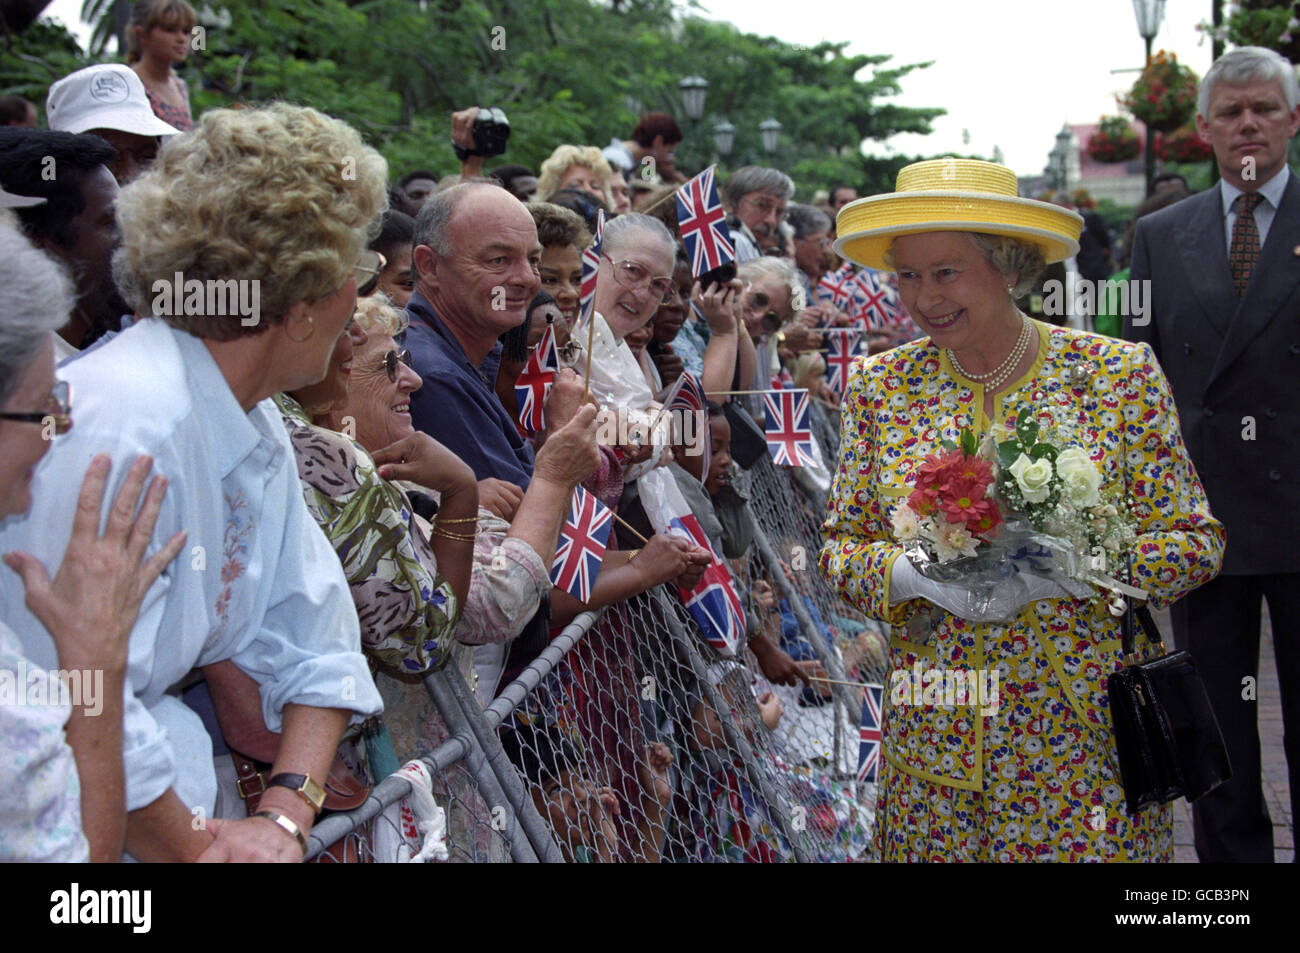 Royalty - Queen Elizabeth II Visit to South Africa - Durban Stock Photo -  Alamy